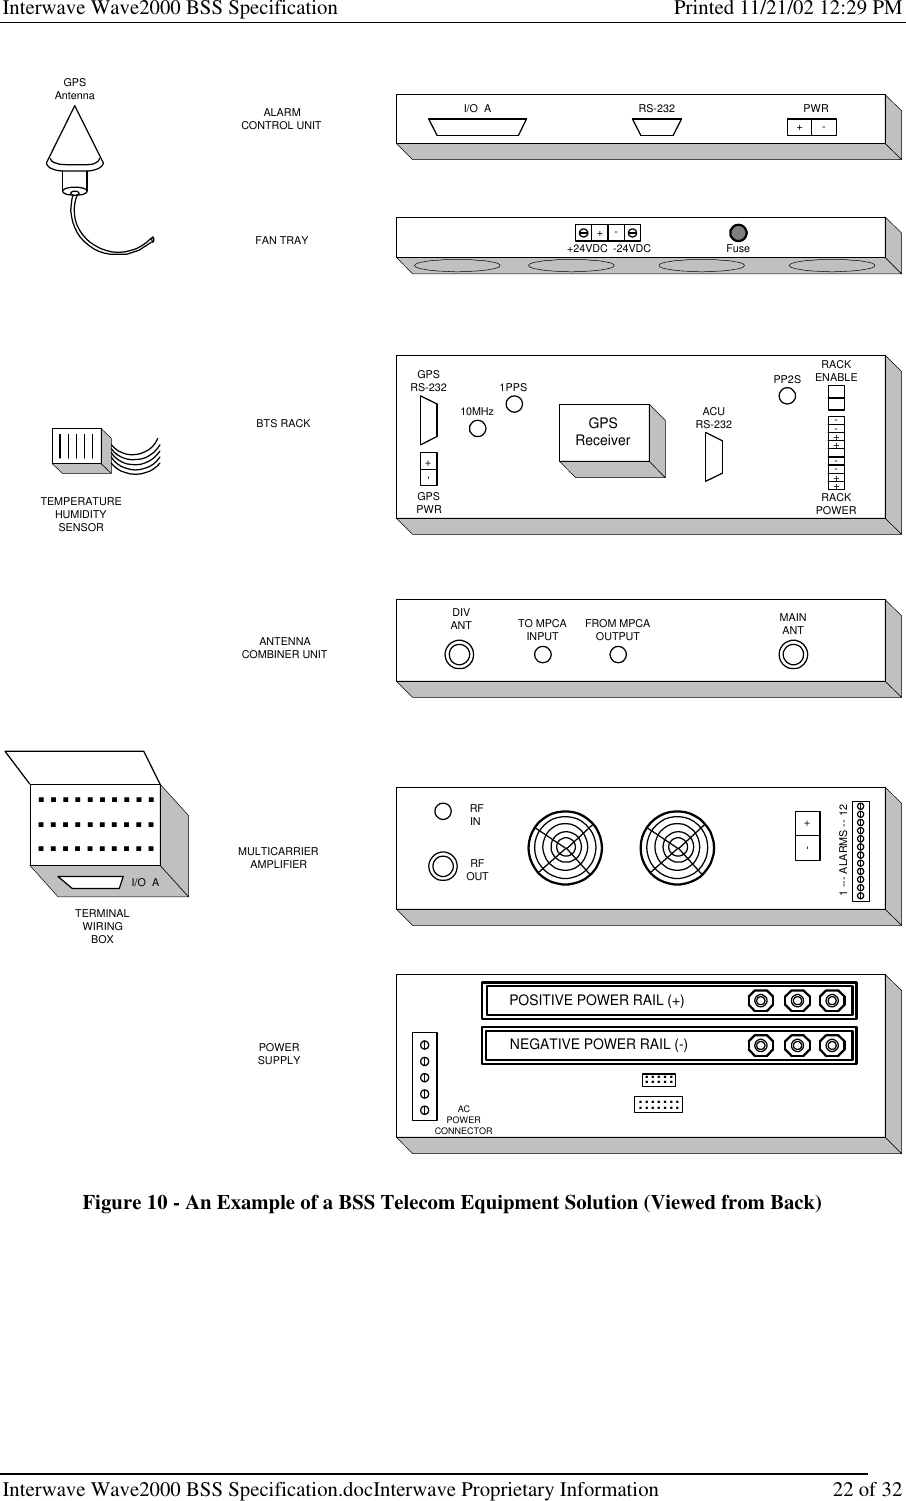 Interwave Wave2000 BSS Specification    Printed 11/21/02 12:29 PM   Interwave Wave2000 BSS Specification.docInterwave Proprietary Information   22 of 32 ALARMCONTROL UNIT+-GPSRS-232GPSPWR10MHz1PPSGPSReceiverACURS-232PP2SRACKENABLERACKPOWERRS-232 PWR+-+24VDC -24VDCFAN TRAY BTS RACKANTENNACOMBINER UNITMULTICARRIERAMPLIFIERPOWERSUPPLYTEMPERATUREHUMIDITYSENSORTO MPCAINPUT FROM MPCAOUTPUTMAINANT RFINRFOUTDIVANT+-1 --- ALARMS -- 12++++----POSITIVE POWER RAIL (+)NEGATIVE POWER RAIL (-)........................ACPOWERCONNECTORI/O  A..............................TERMINALWIRINGBOXI/O  AGPSAntenna+-Fuse Figure 10 - An Example of a BSS Telecom Equipment Solution (Viewed from Back)      